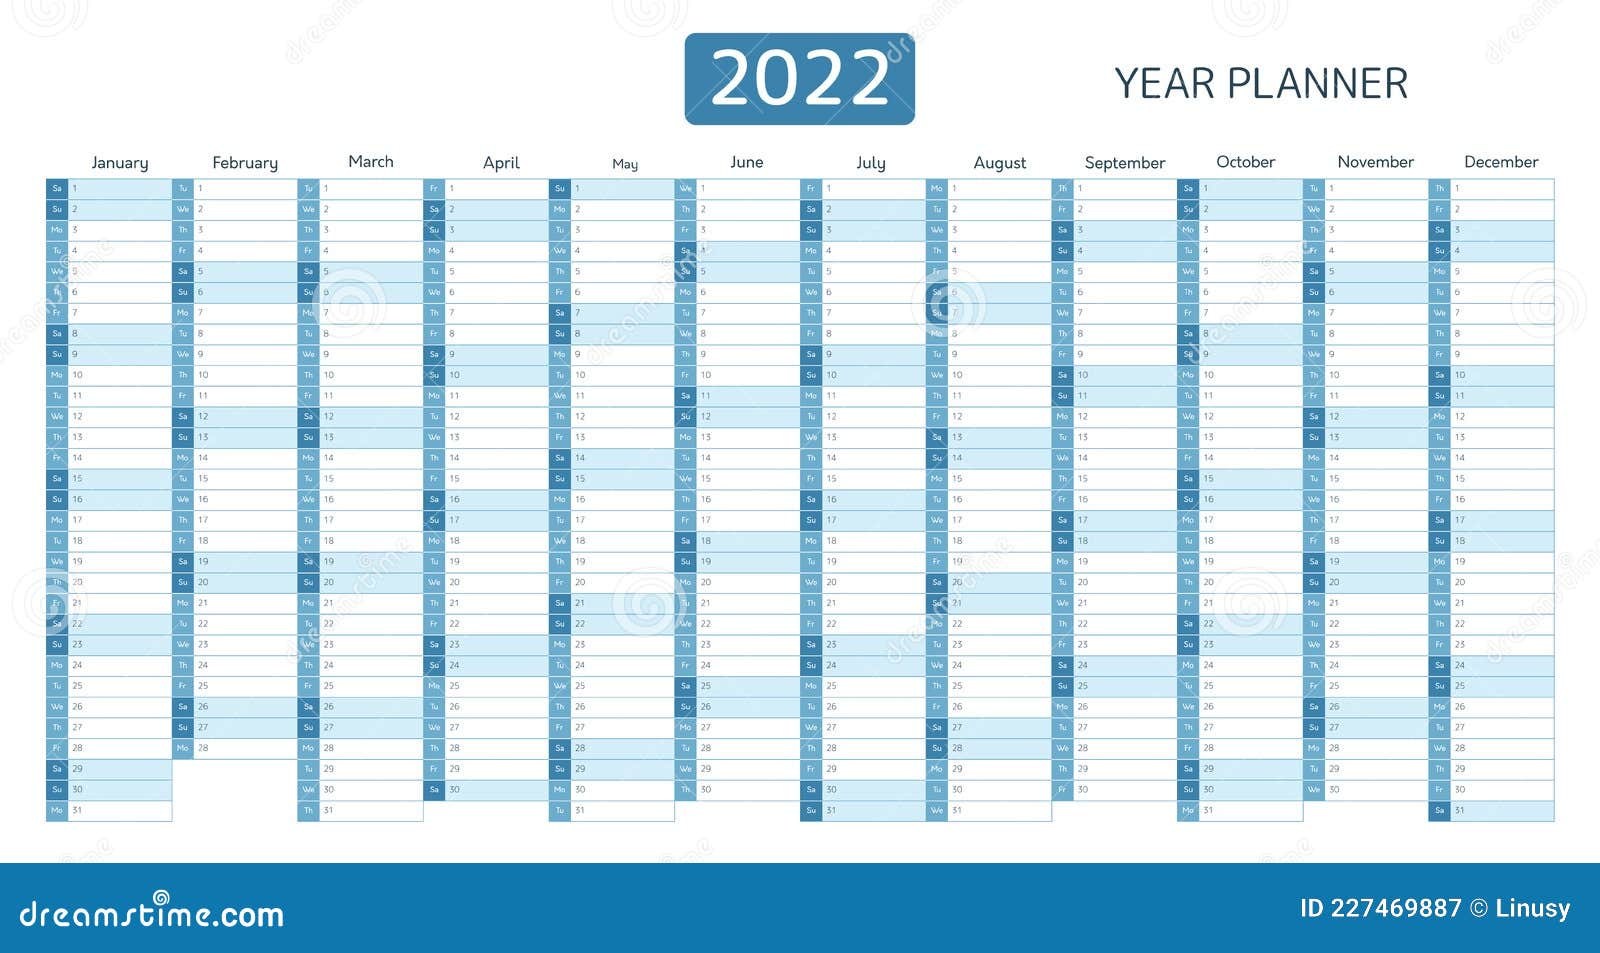 year-planner-calendar-for-2022-with-vertical-grid-stock-vector